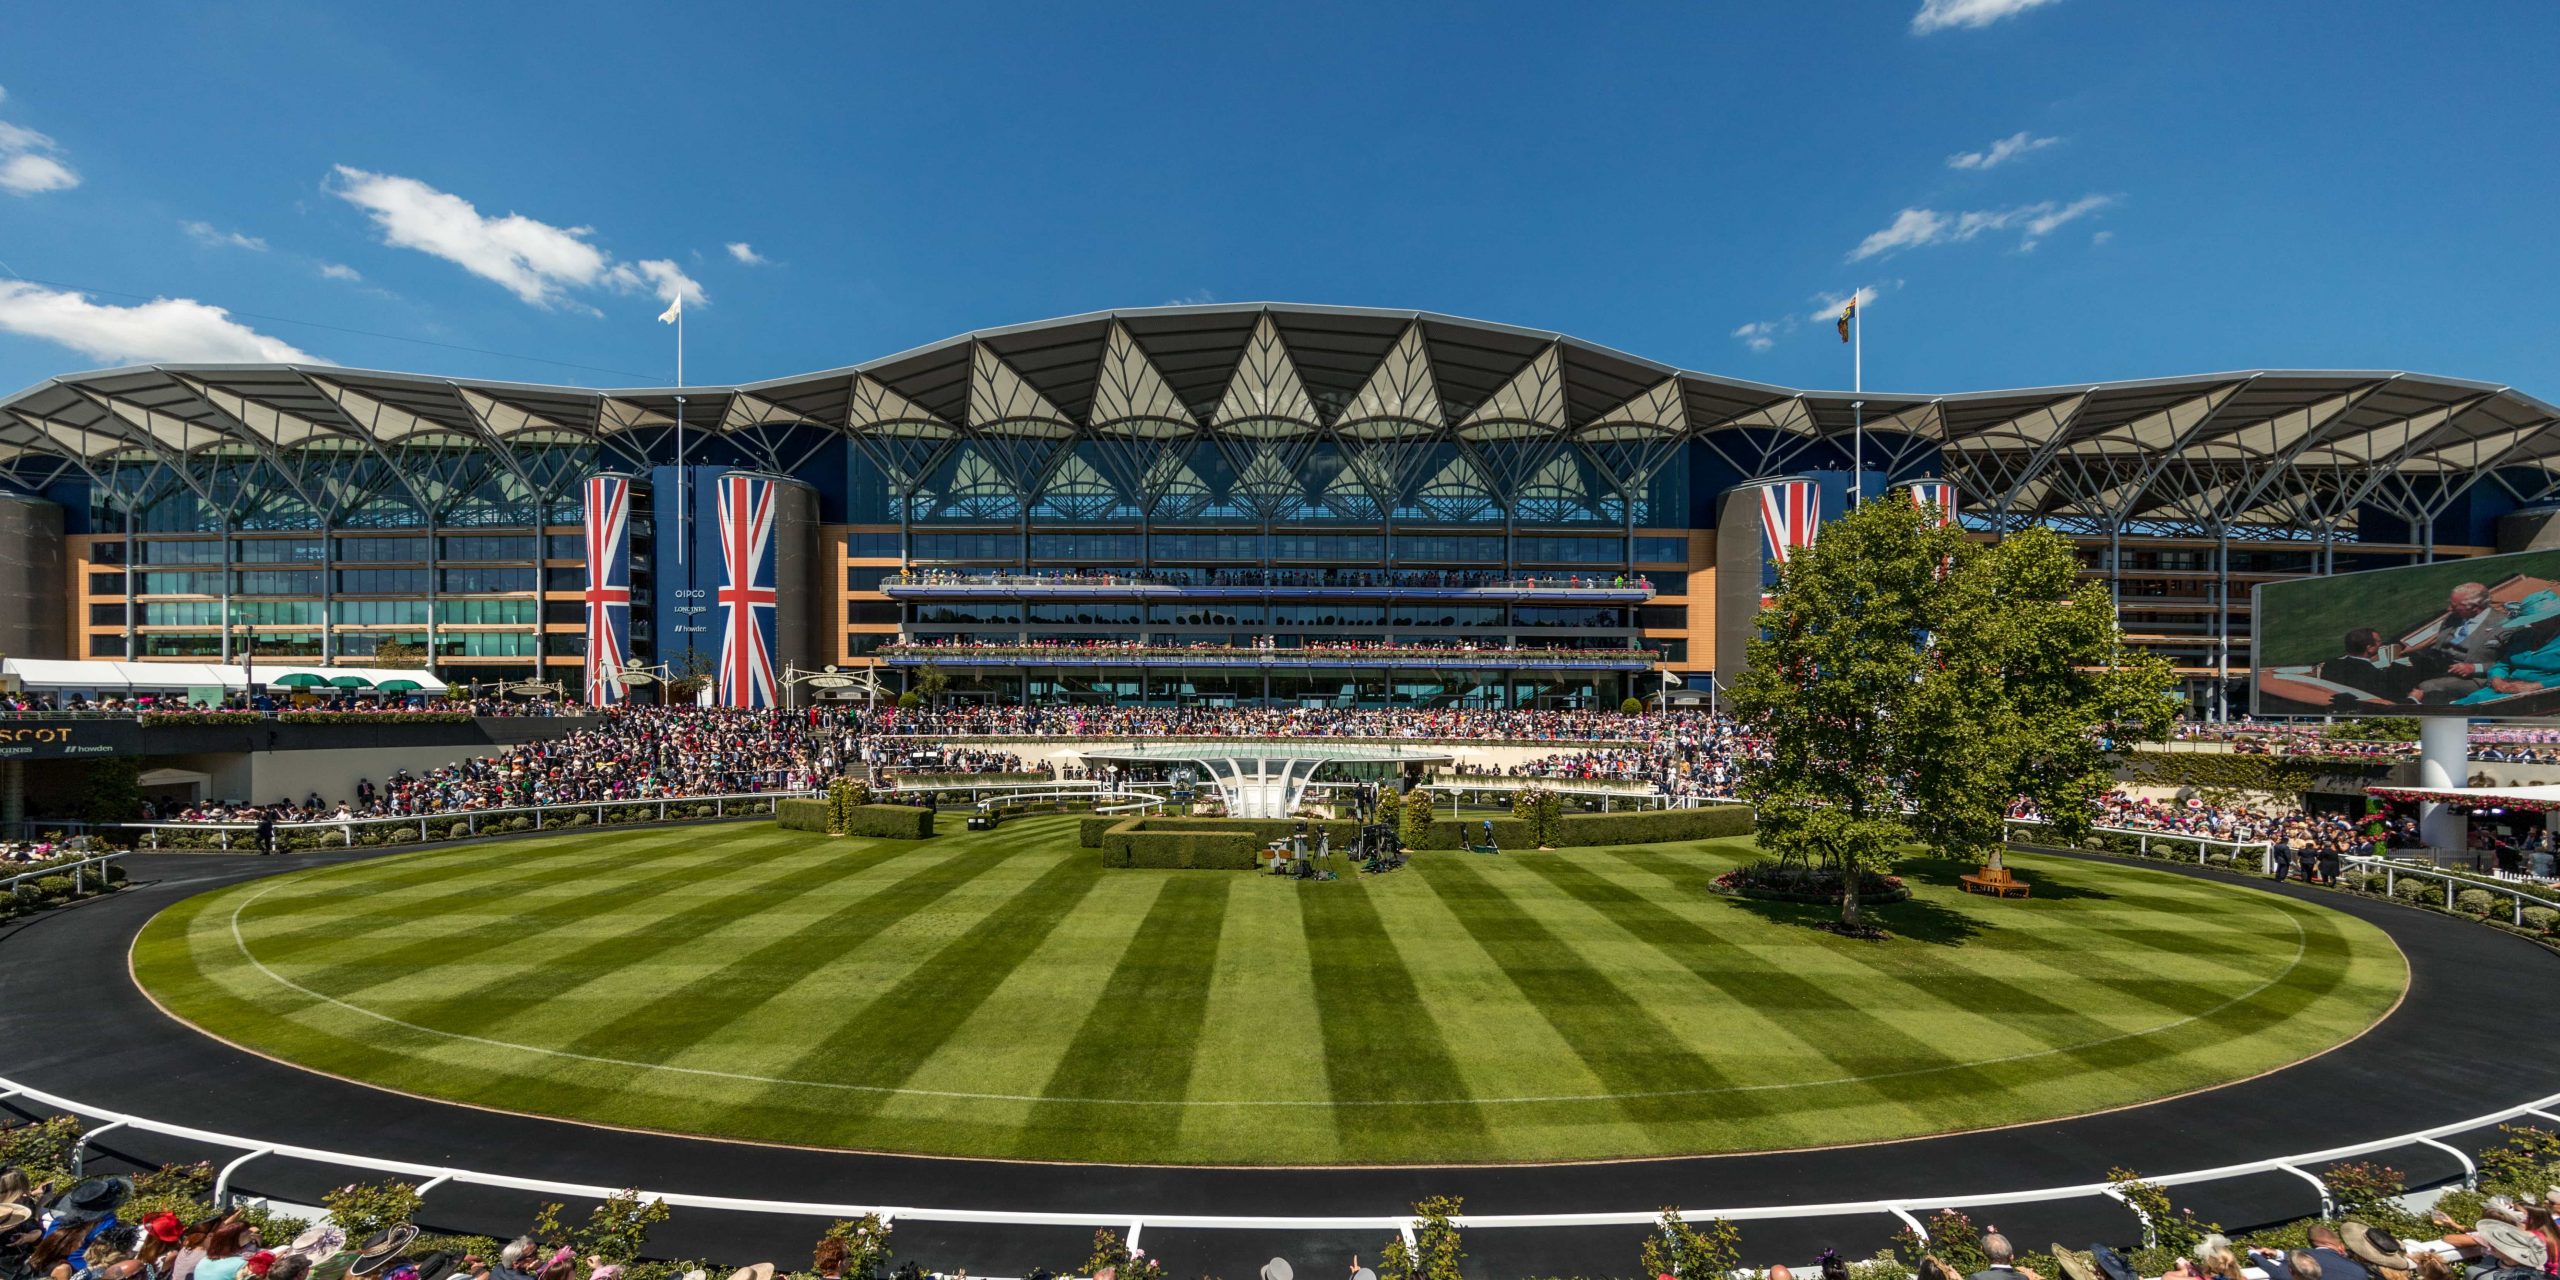 Royal Ascot Racecourse - it's been a week to remember